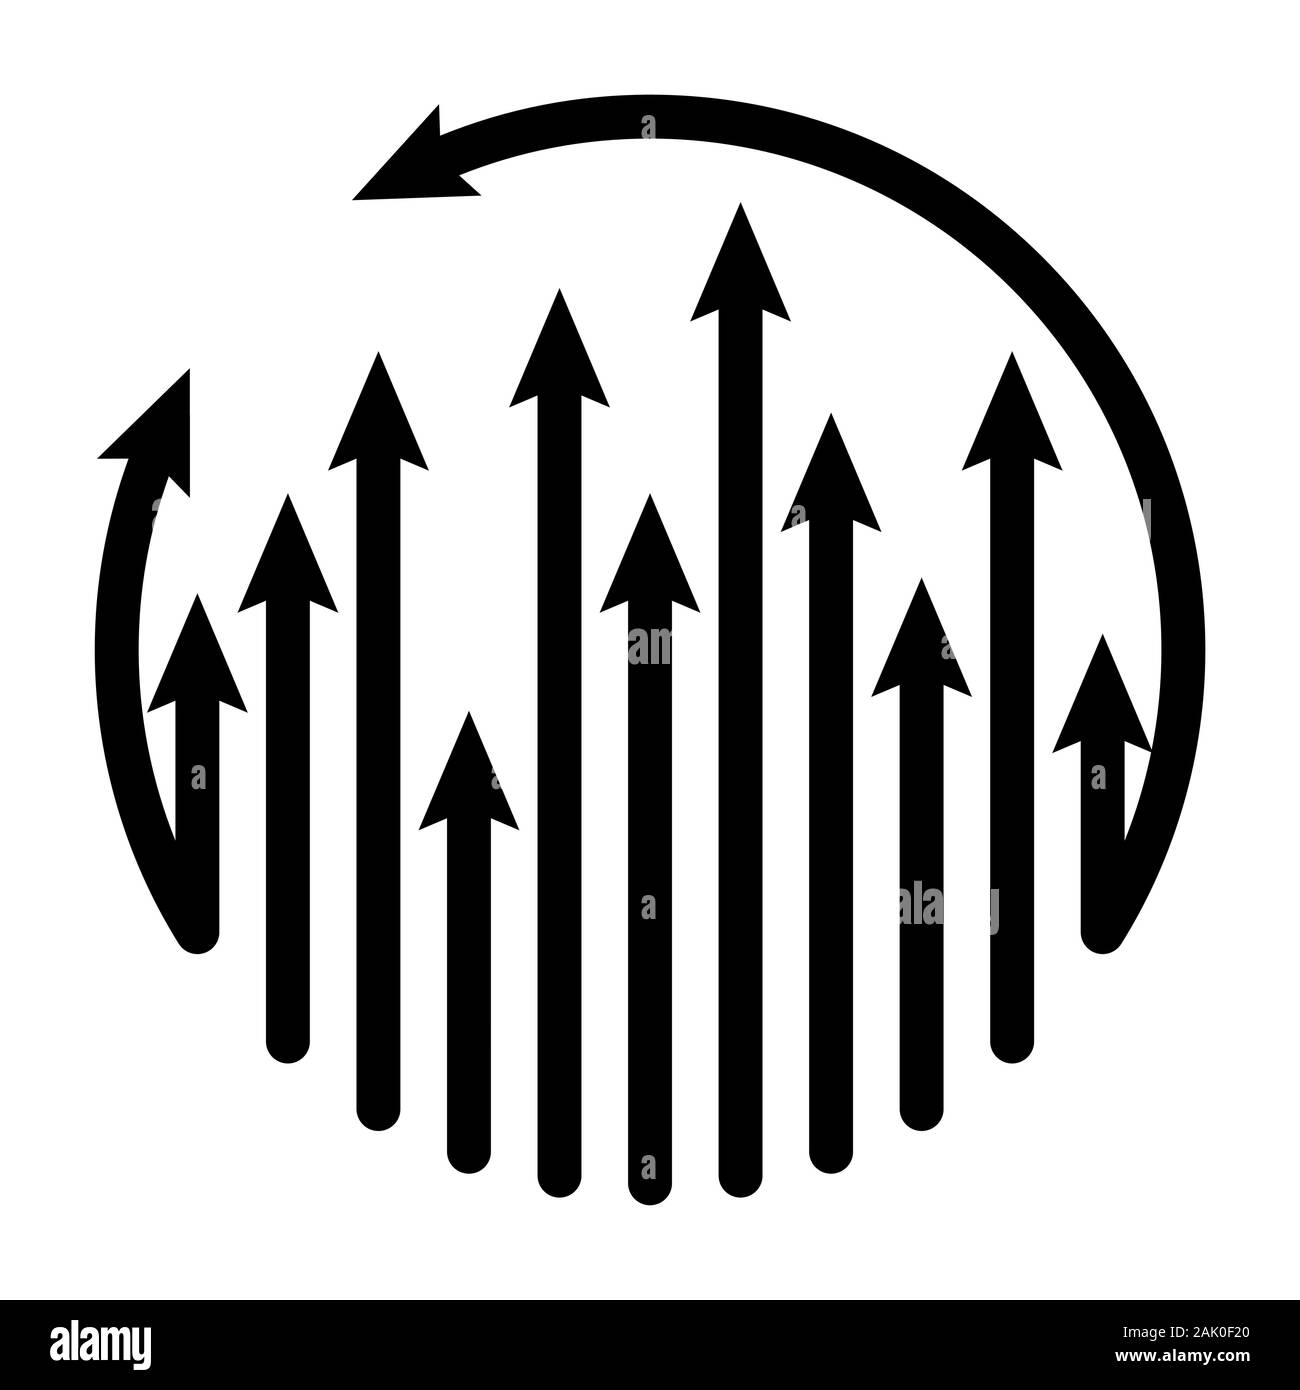 Arrows ilustration cycle growing up Vector template, icon, business, abstract, symbol, design, increase, company, growth, illustration, success concep Stock Vector